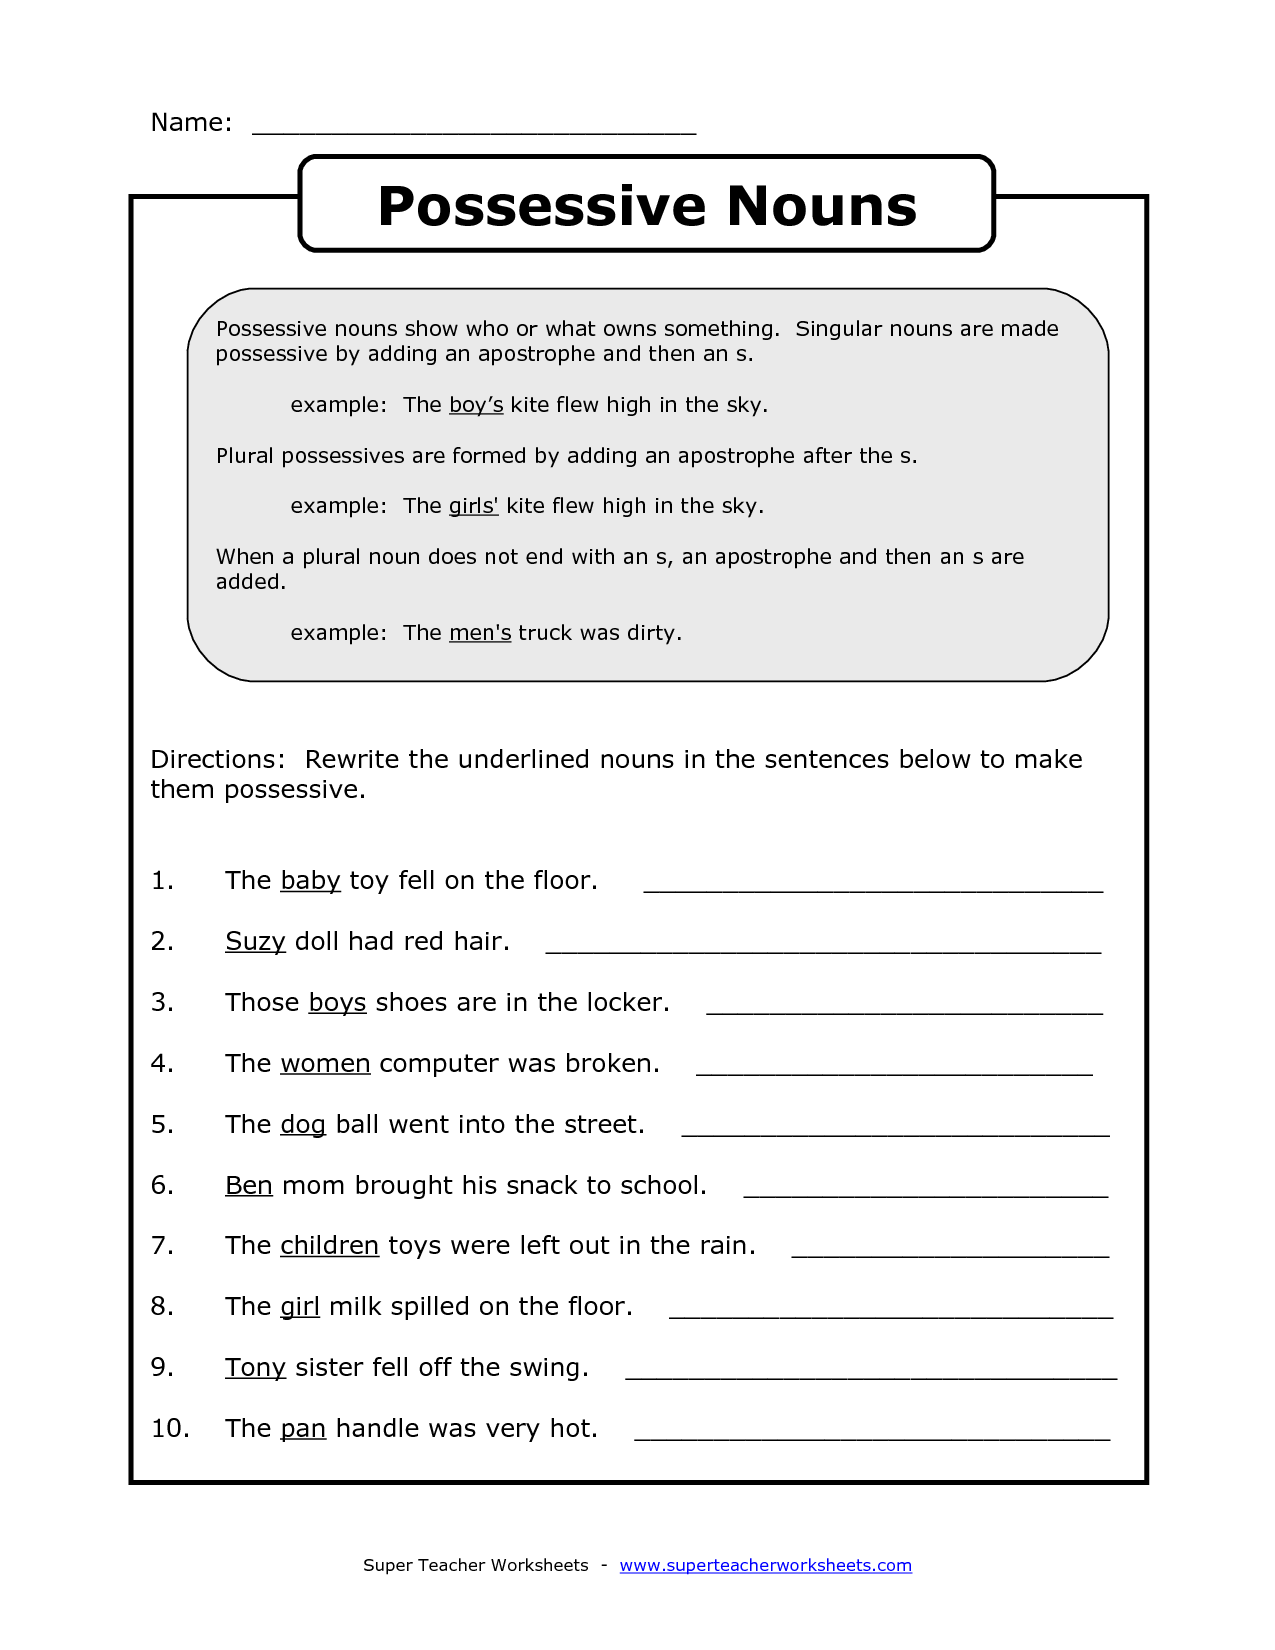 16 Best Images Of Worksheets Adjectives And Pronouns Demonstrative Pronouns Worksheet